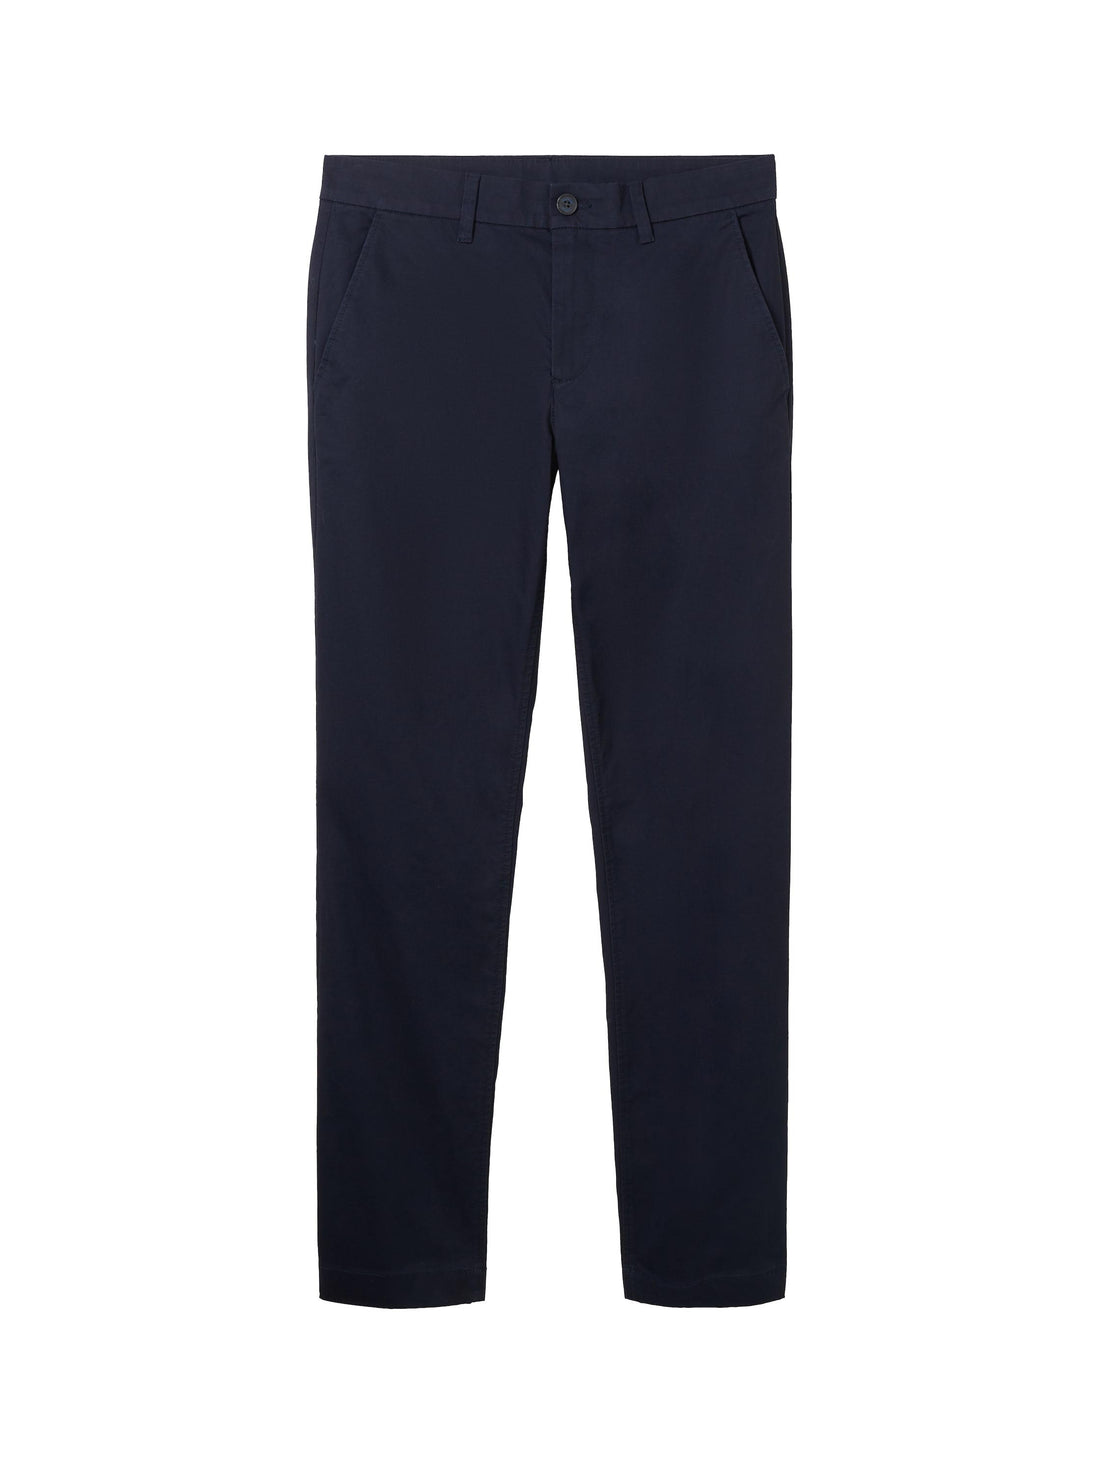 Regular Washed Chino In 2 Lengths_1040240_10668_02